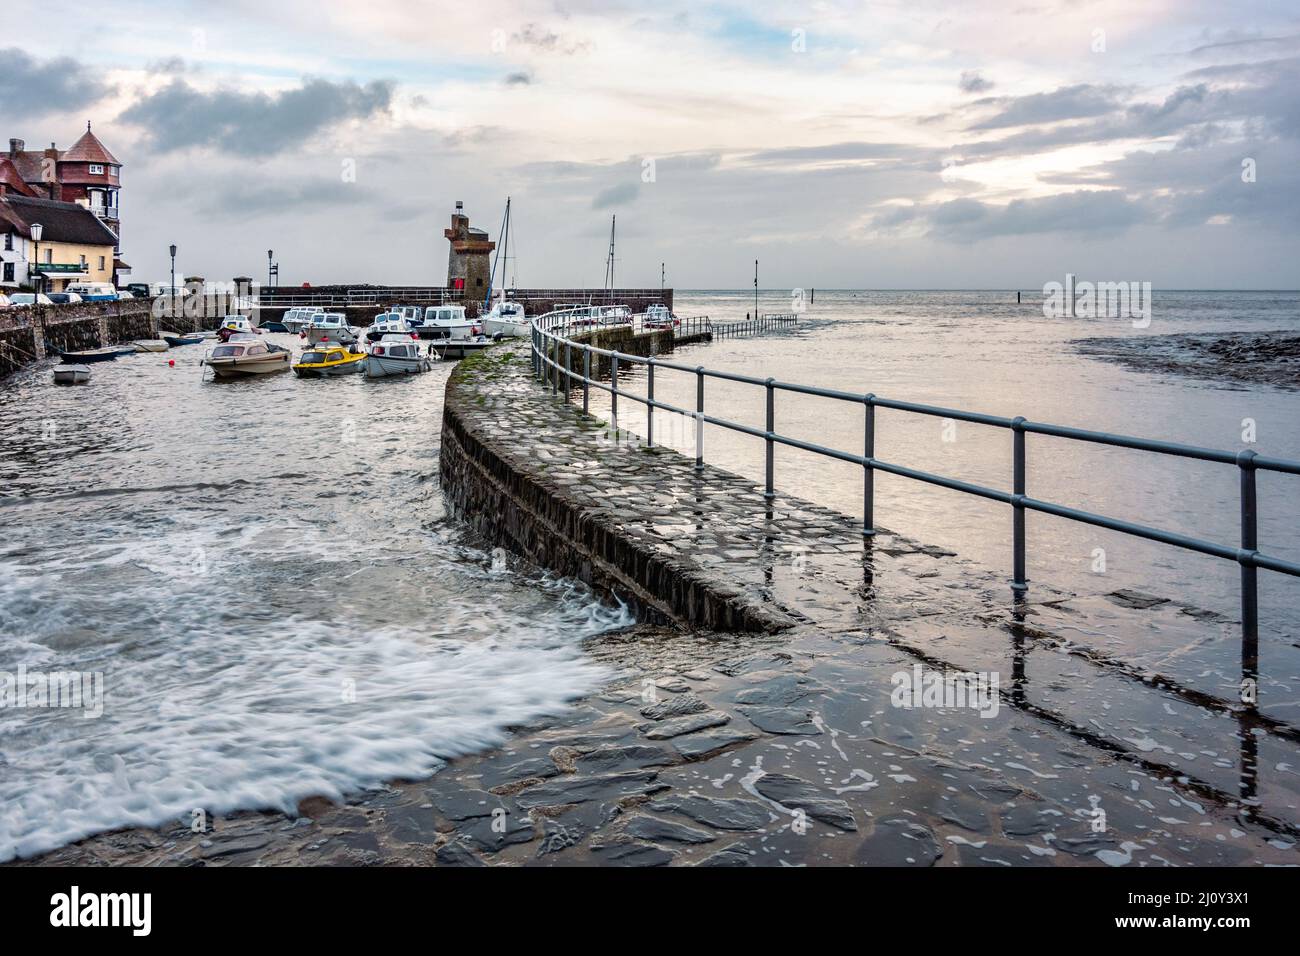 LYNMOUTH, DEVON, UK - OCTOBER 20 : View of the harbour in Lynmouth, Devon on October 20, 2013 Stock Photo